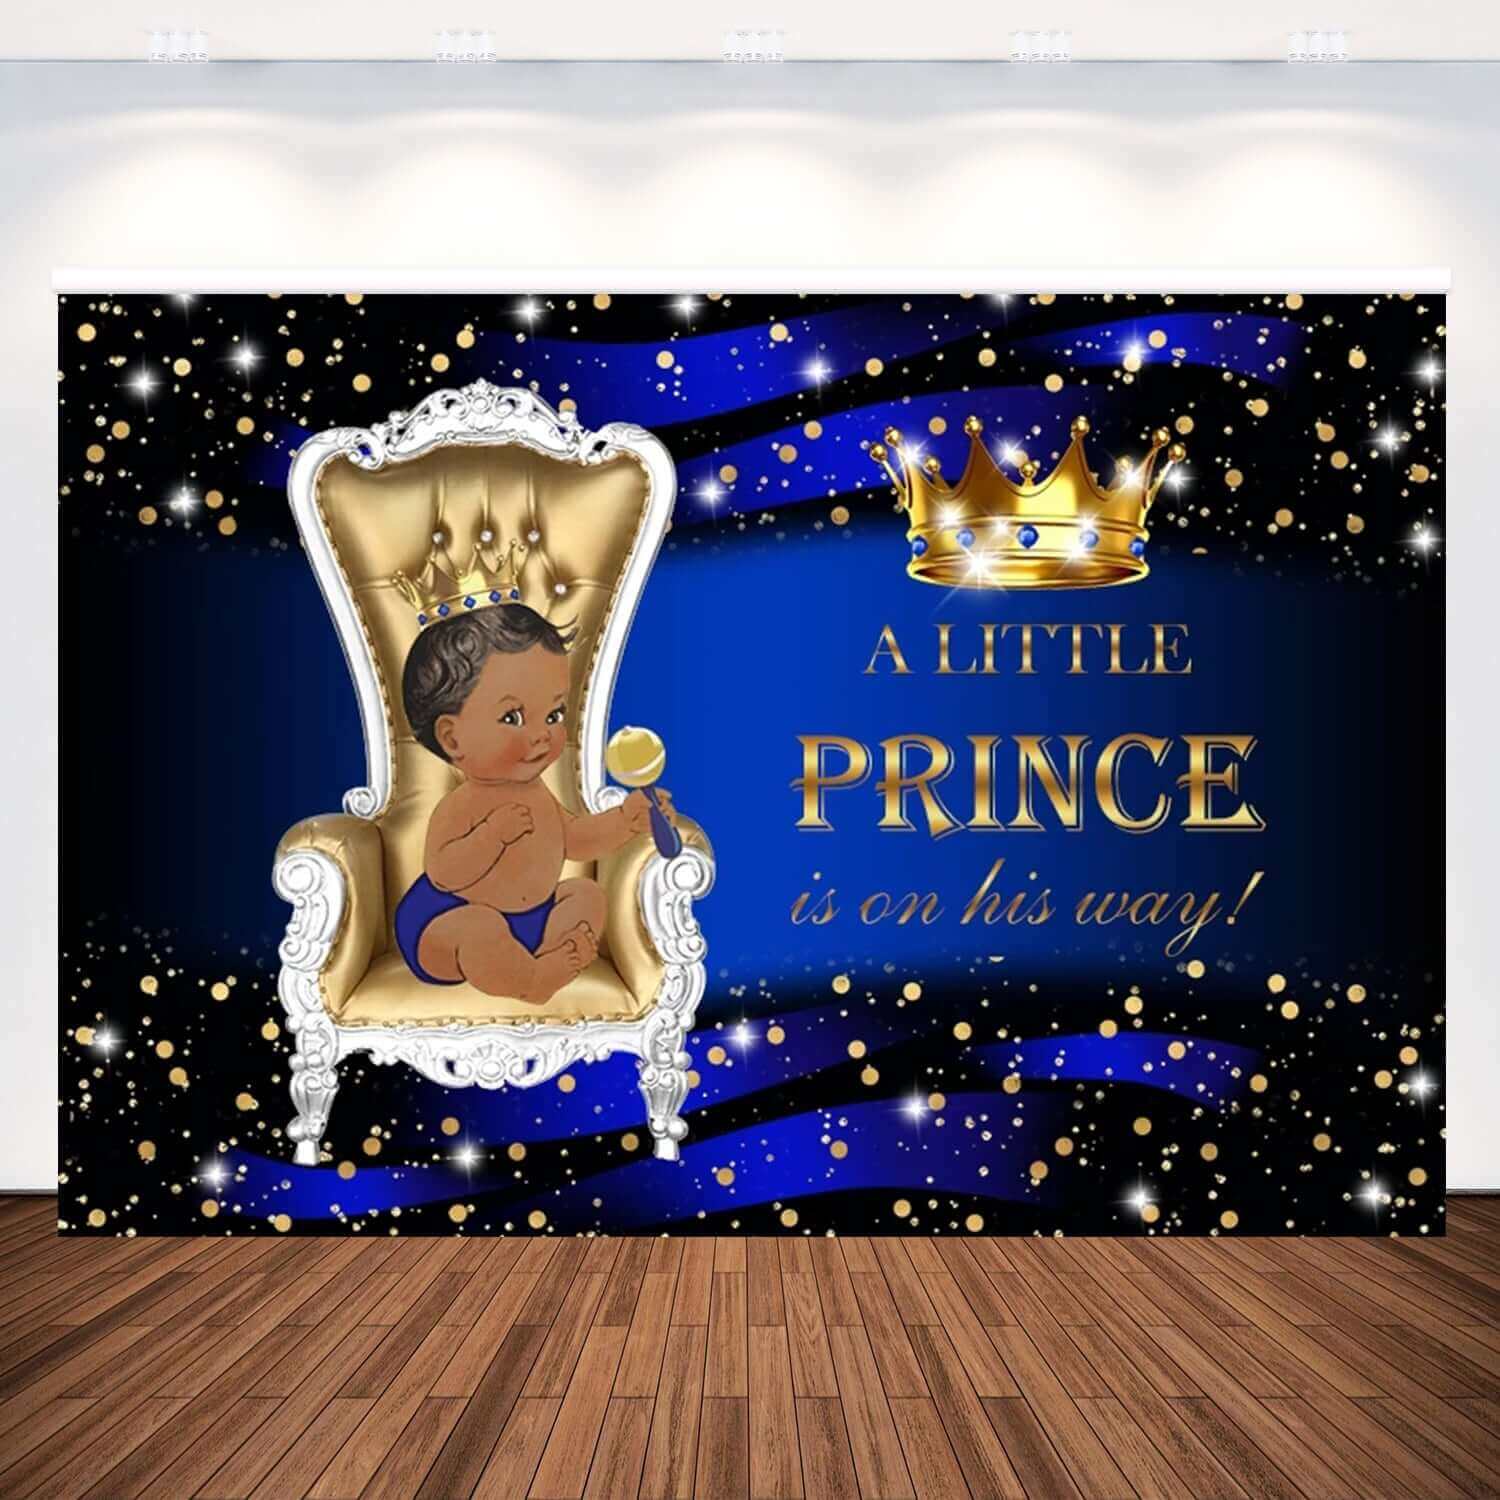 Royal Blue Prince Backdrop Gold Crown Chair Newborn Baby Shower Birthday Party Banner Photo